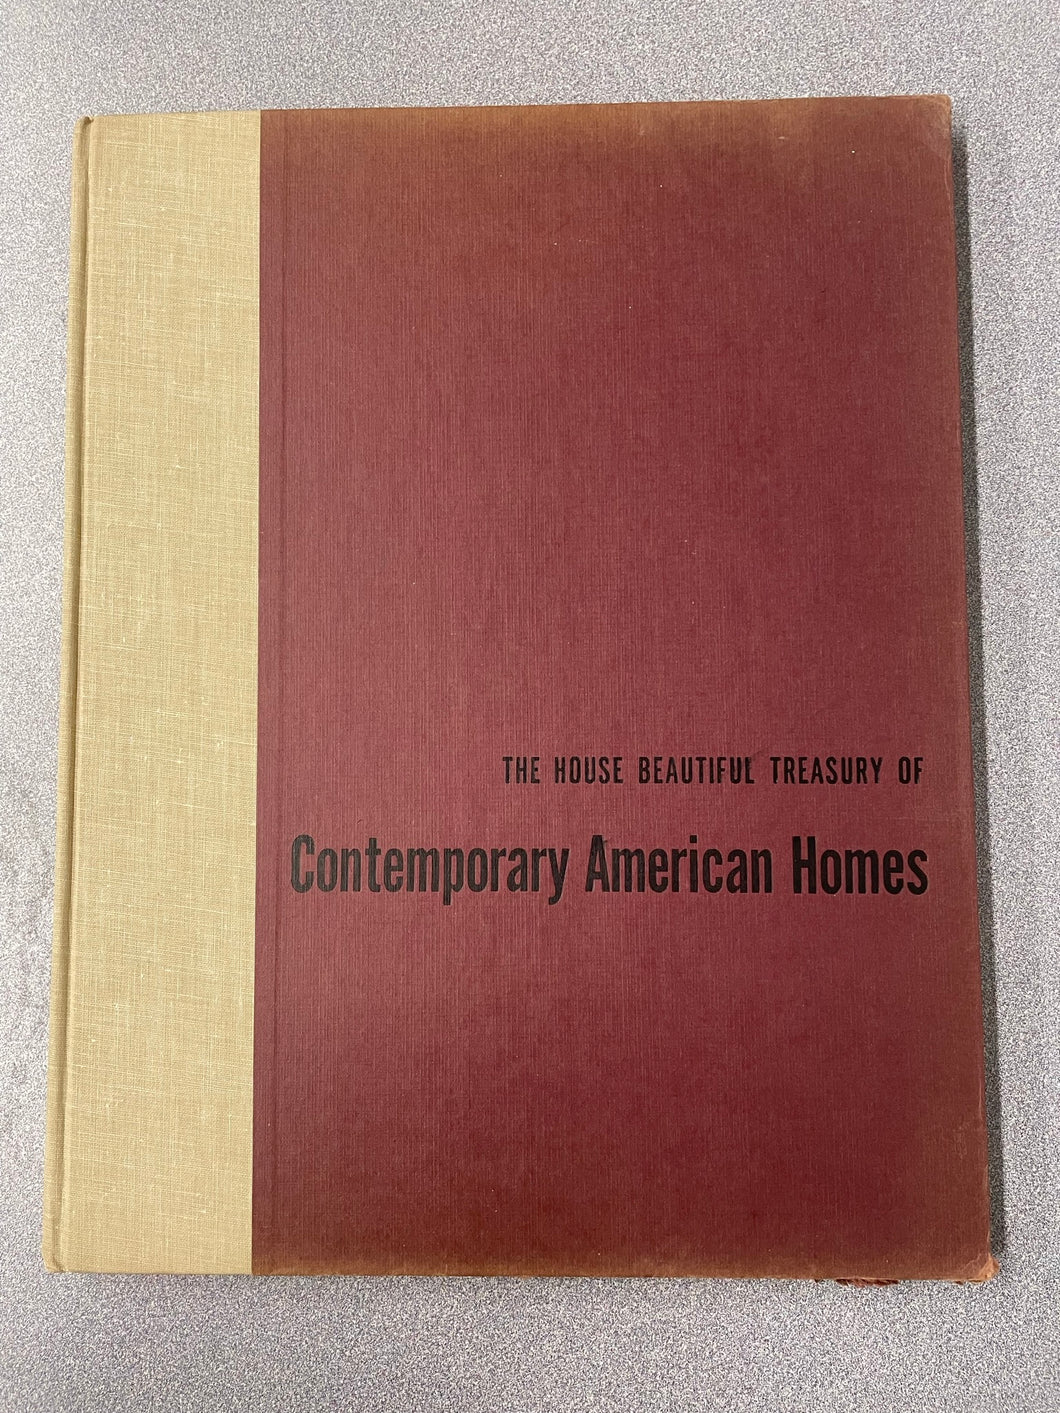 The House Beautiful Treasury of Contemporary American Homes, Barry, Joseph [1958] A 5/23